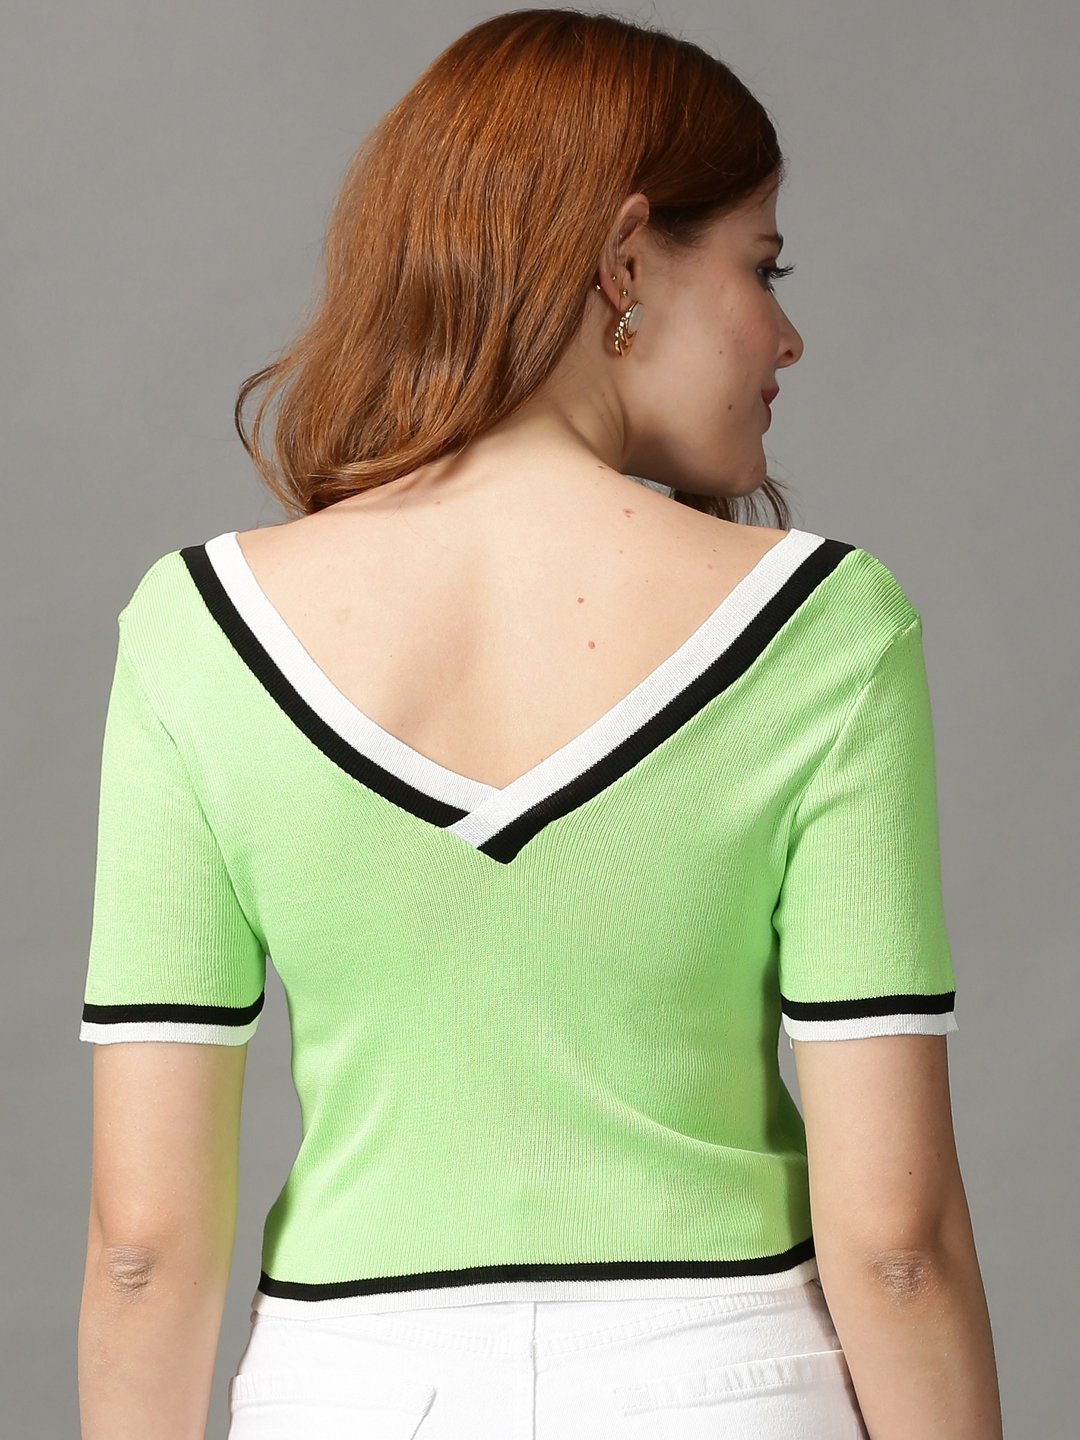 Women's Green Polycotton Solid Tops